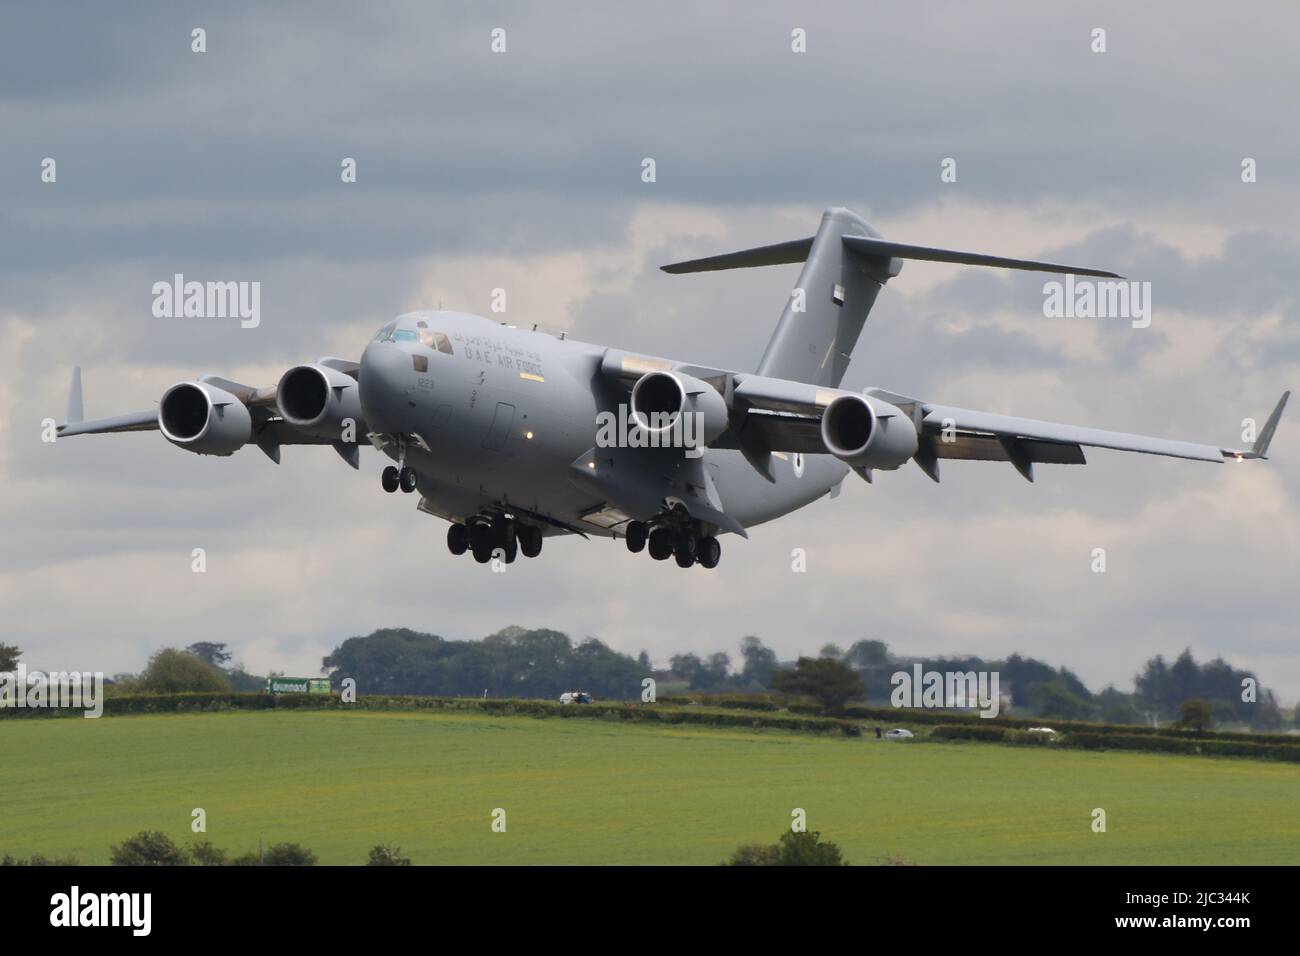 1223 (100401), a Boeing C-17 Globemaster III operated by the United Arab Emirates Air Force, arriving at Prestwick International Airport in Ayrshire, Scotland. Stock Photo